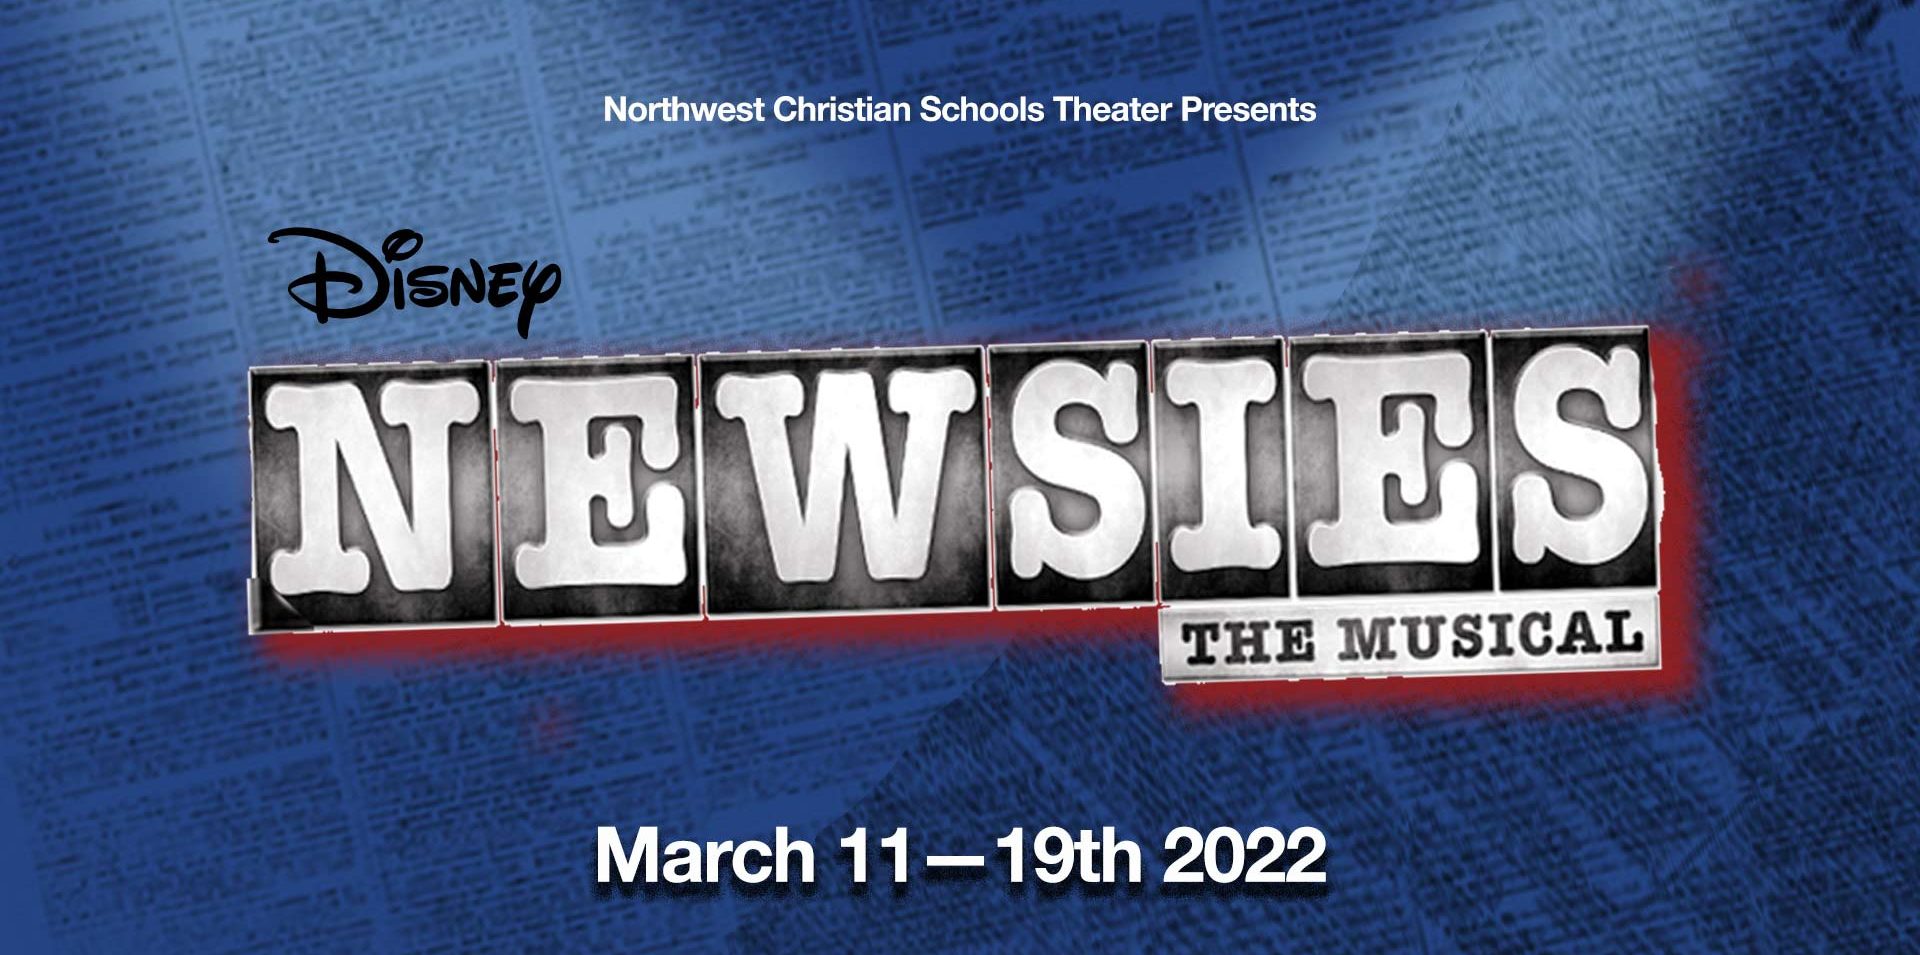 NWCS Theater Presents Newsies